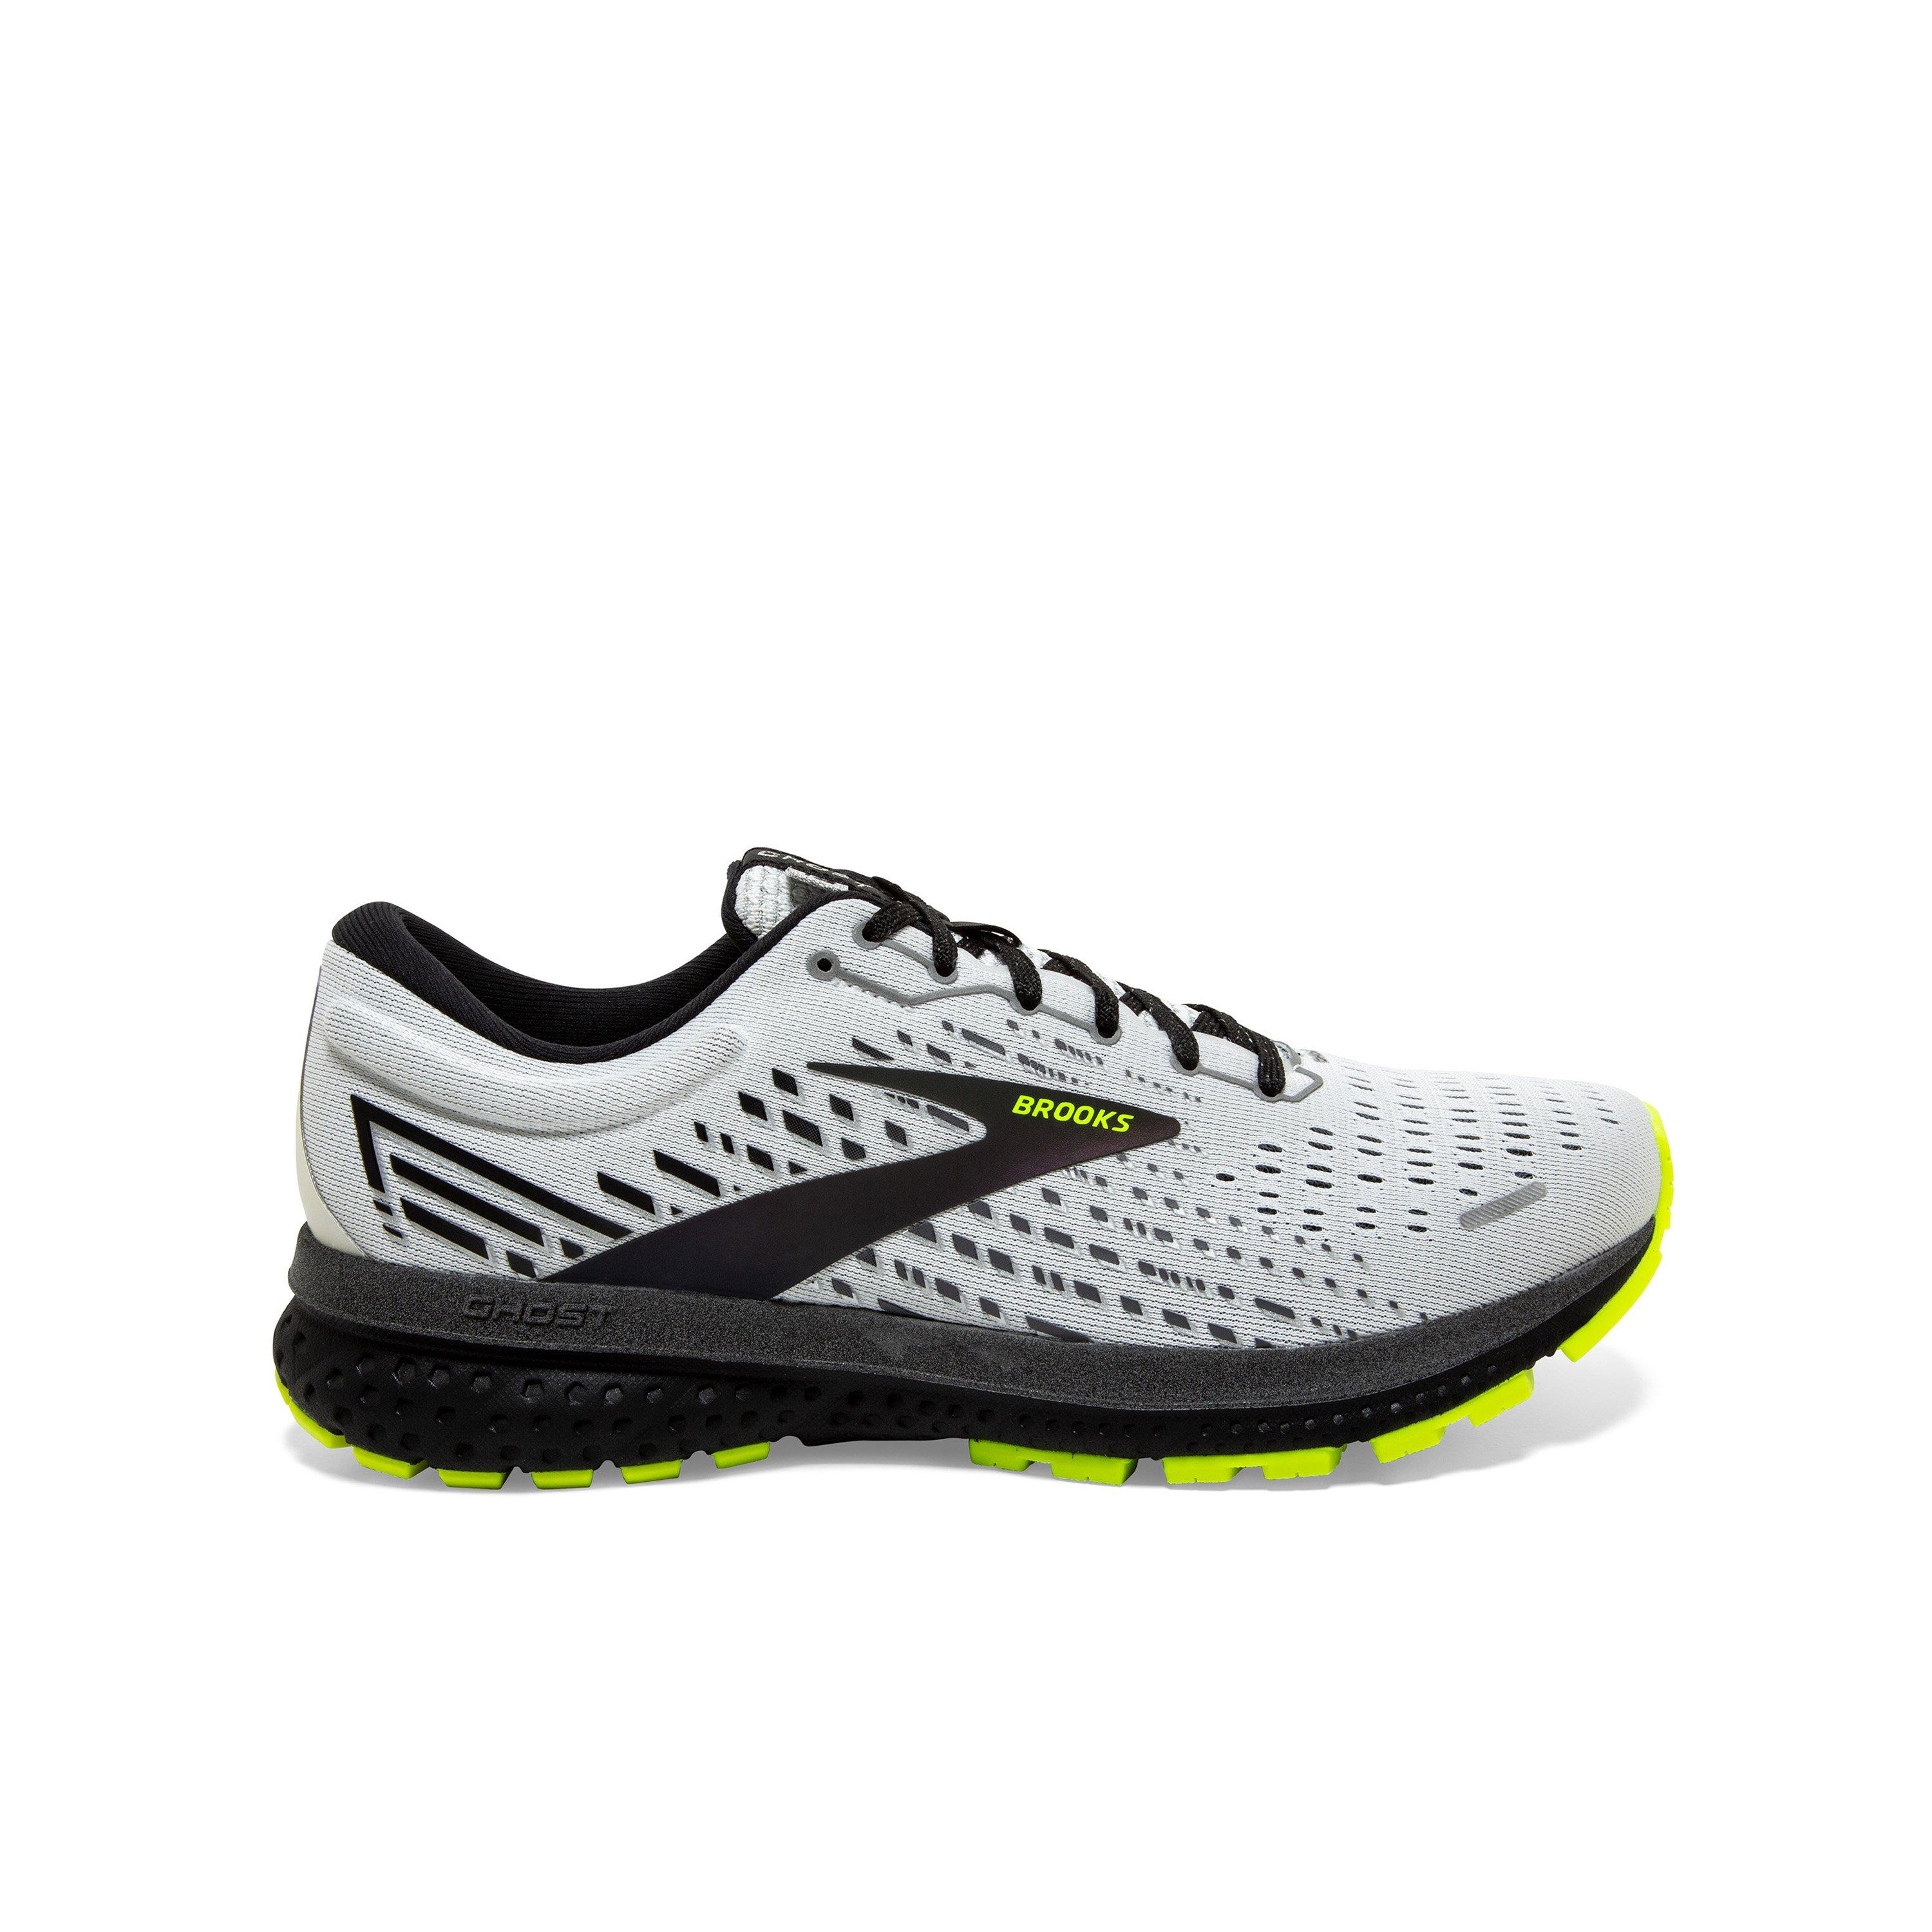 where to buy brooks running shoes near me